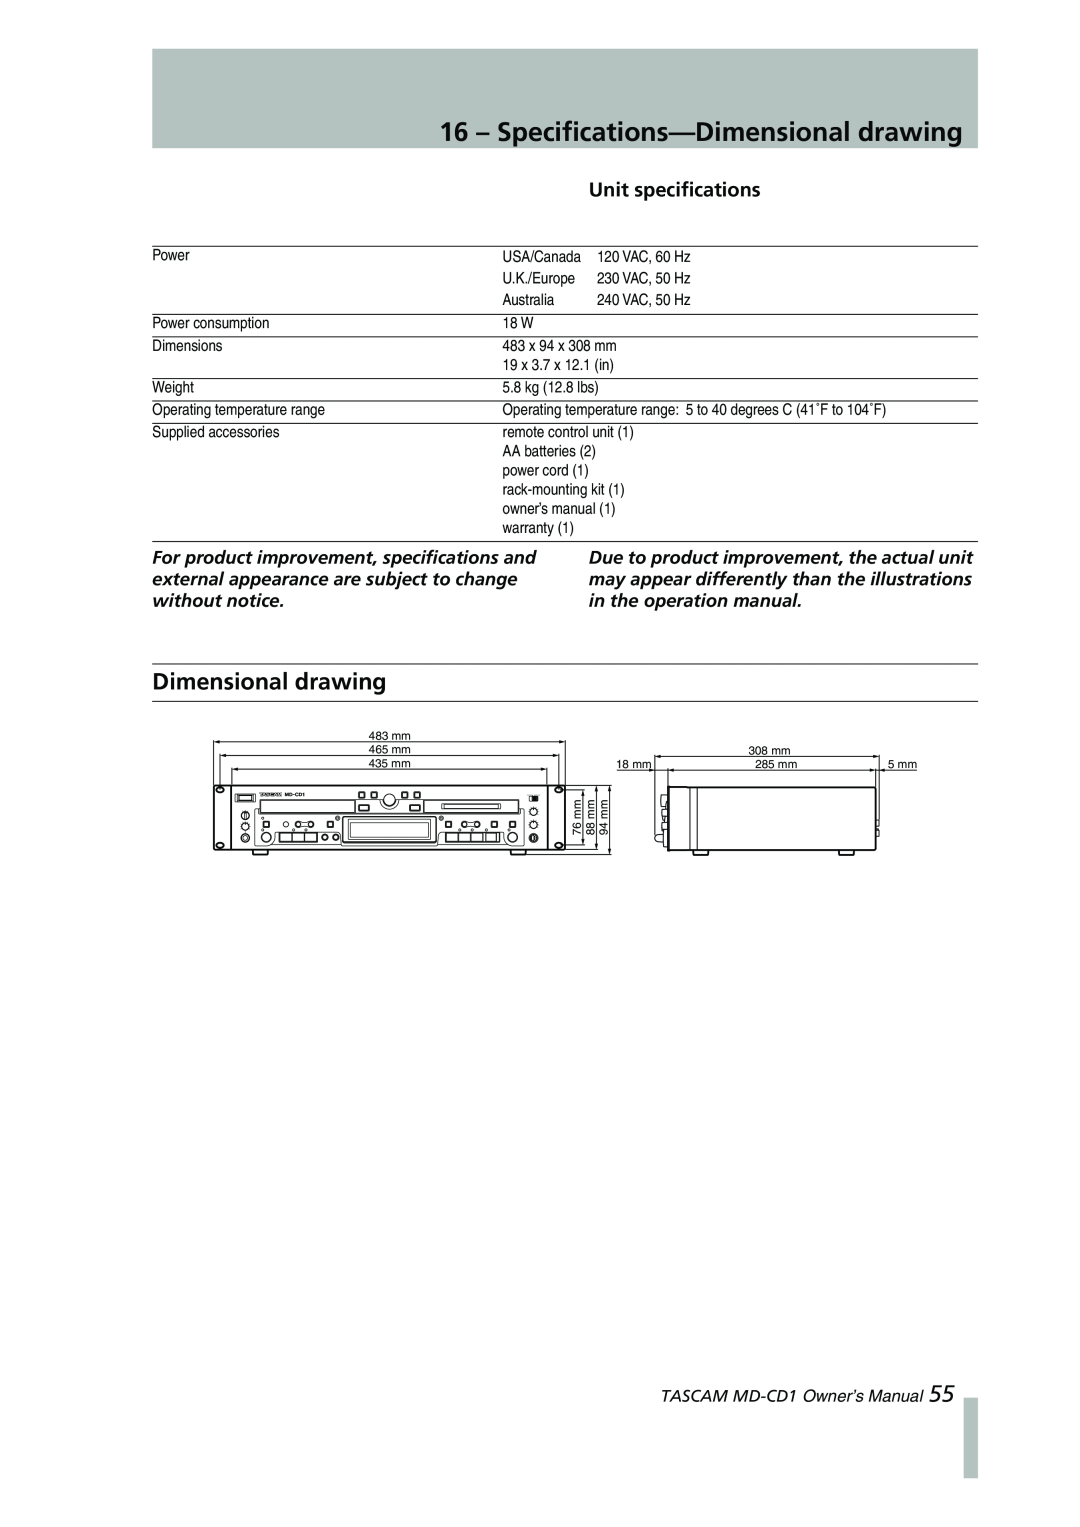 Tascam MD-CD1 owner manual Specifications-Dimensionaldrawing, Dimensional drawing 